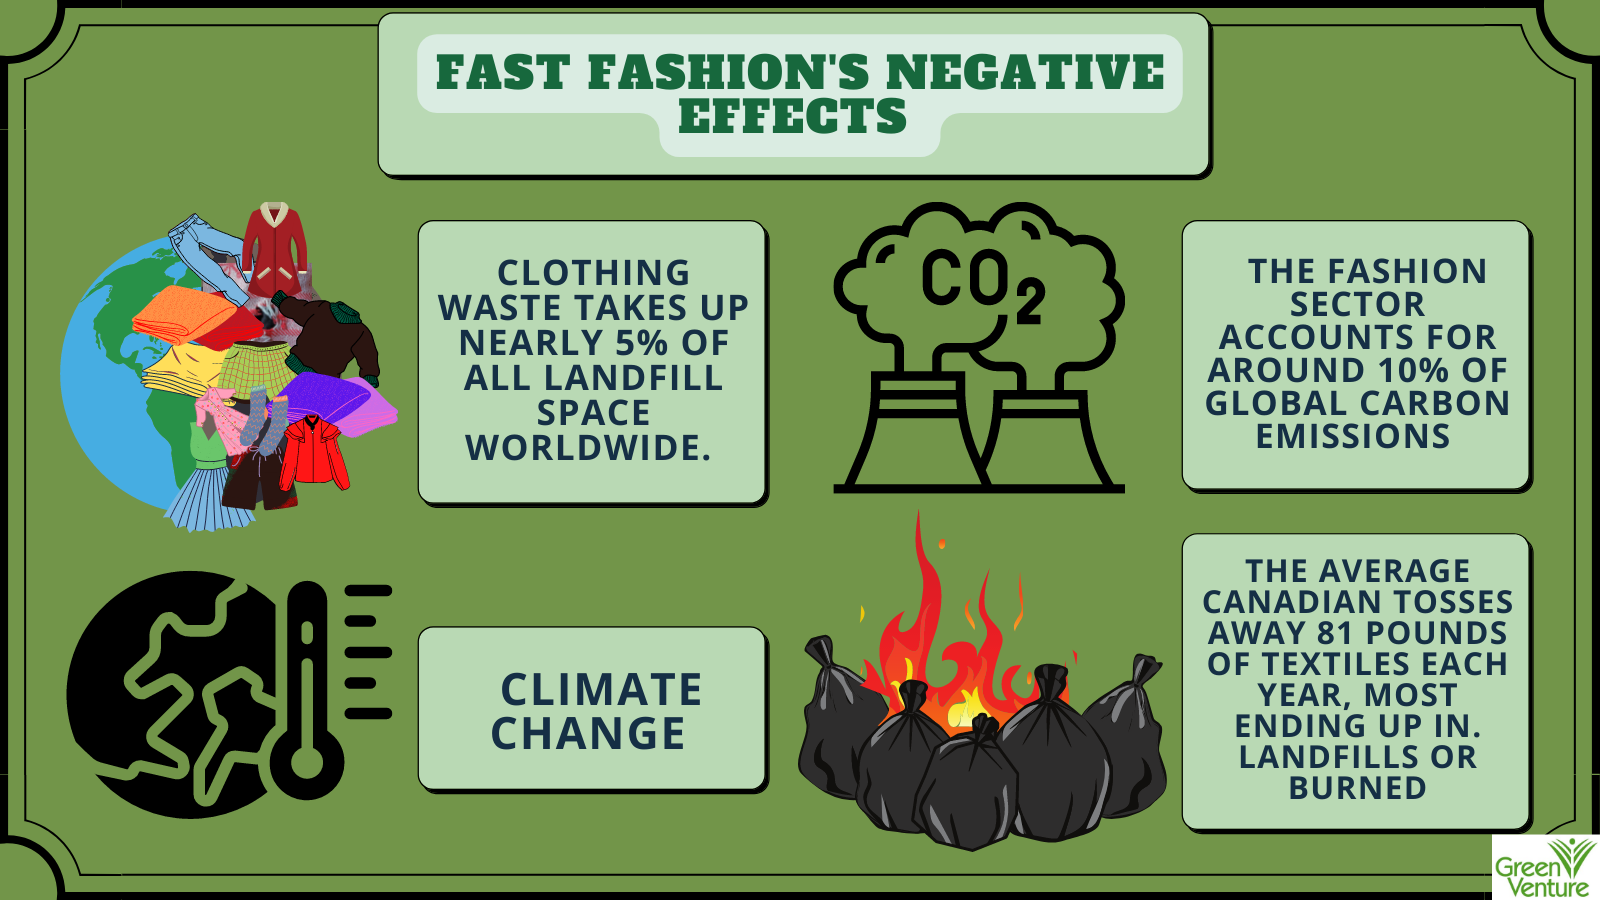 Dark Green Background, with a black border. Text reads: “Fast Fashion’s Negative Effects.” Images include the Earth getting covered by clothing, captioned: “ clothing waste takes up nearly 5% of all landfill space worldwide.”, an earth with a thermometer captioned: “Climate change”,  CO2 emissions coming from a factory captioned: “ The fashion sector accounts for around 10% of global carbon emissions,” and an image of garbage bags on fire captioned: “The average Canadian tosses away 81 pounds of textiles each year, most ending up in landfills or burned” 